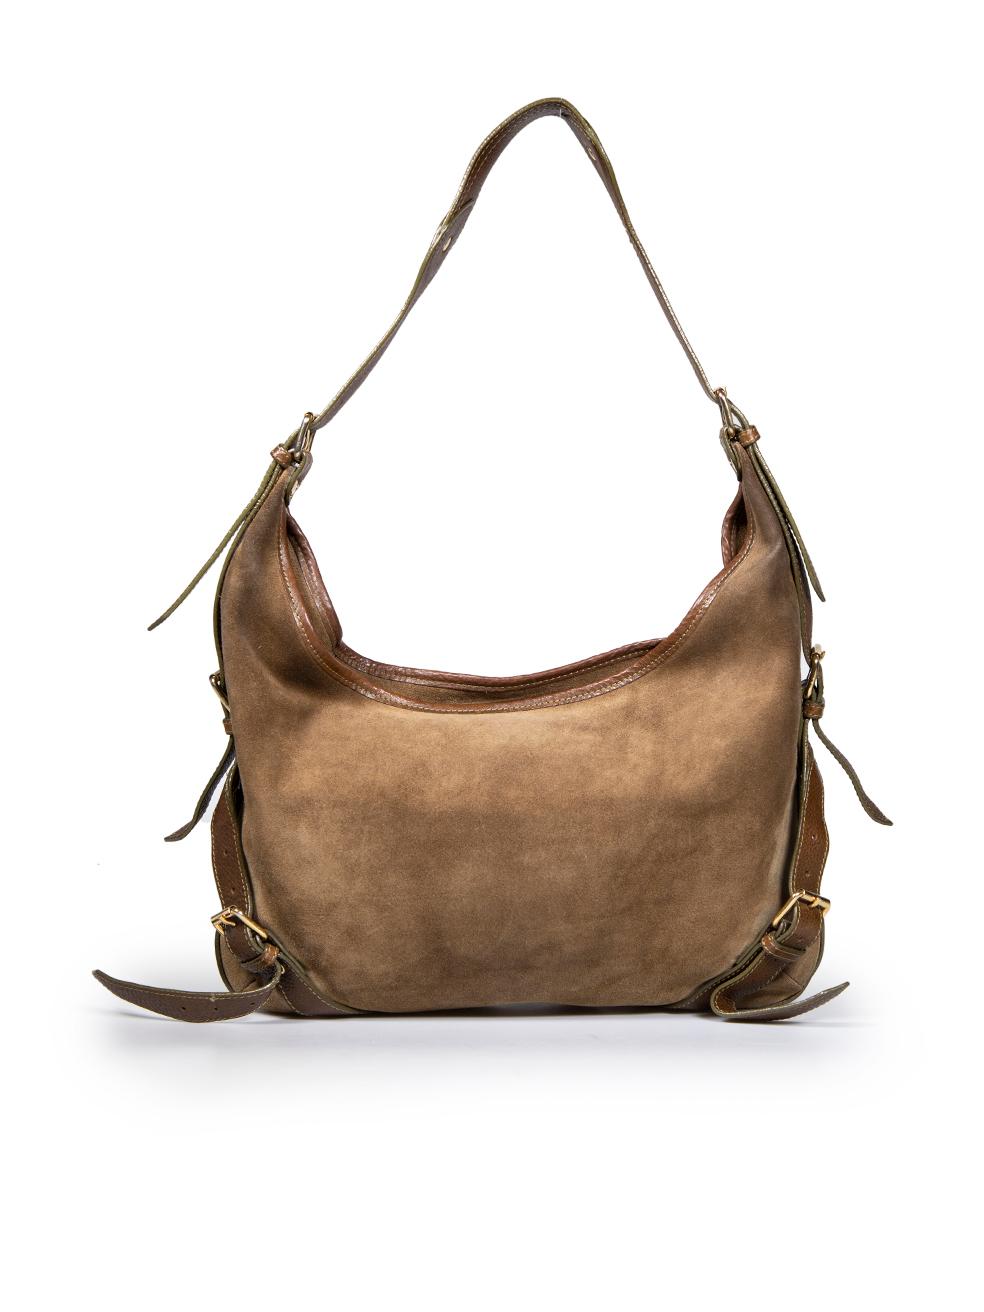 Burberry Khaki Suede Hobo Shoulder Bag In Good Condition In London, GB